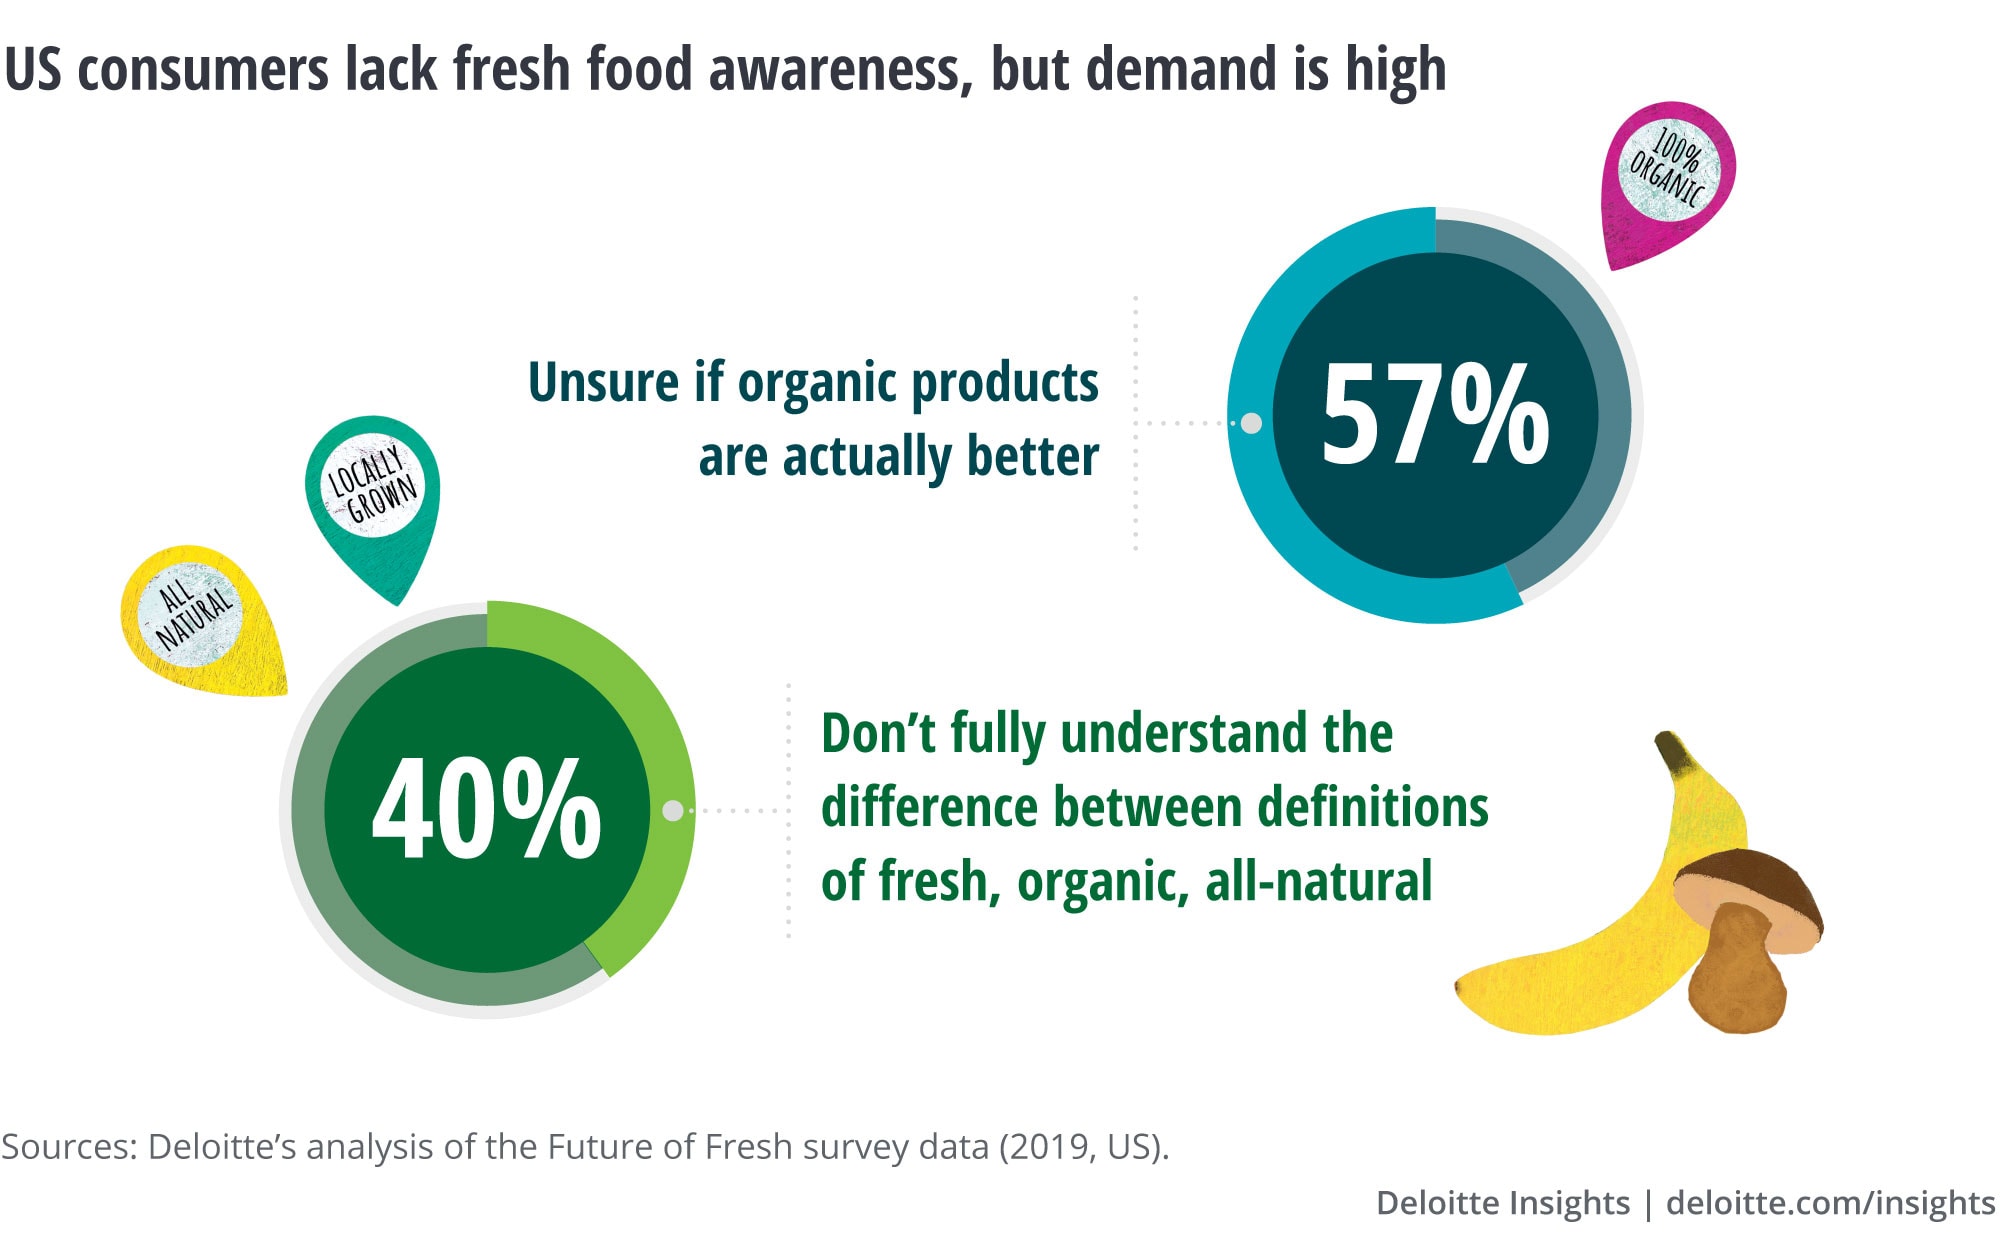 US consumers lack fresh food awareness, but demand is high